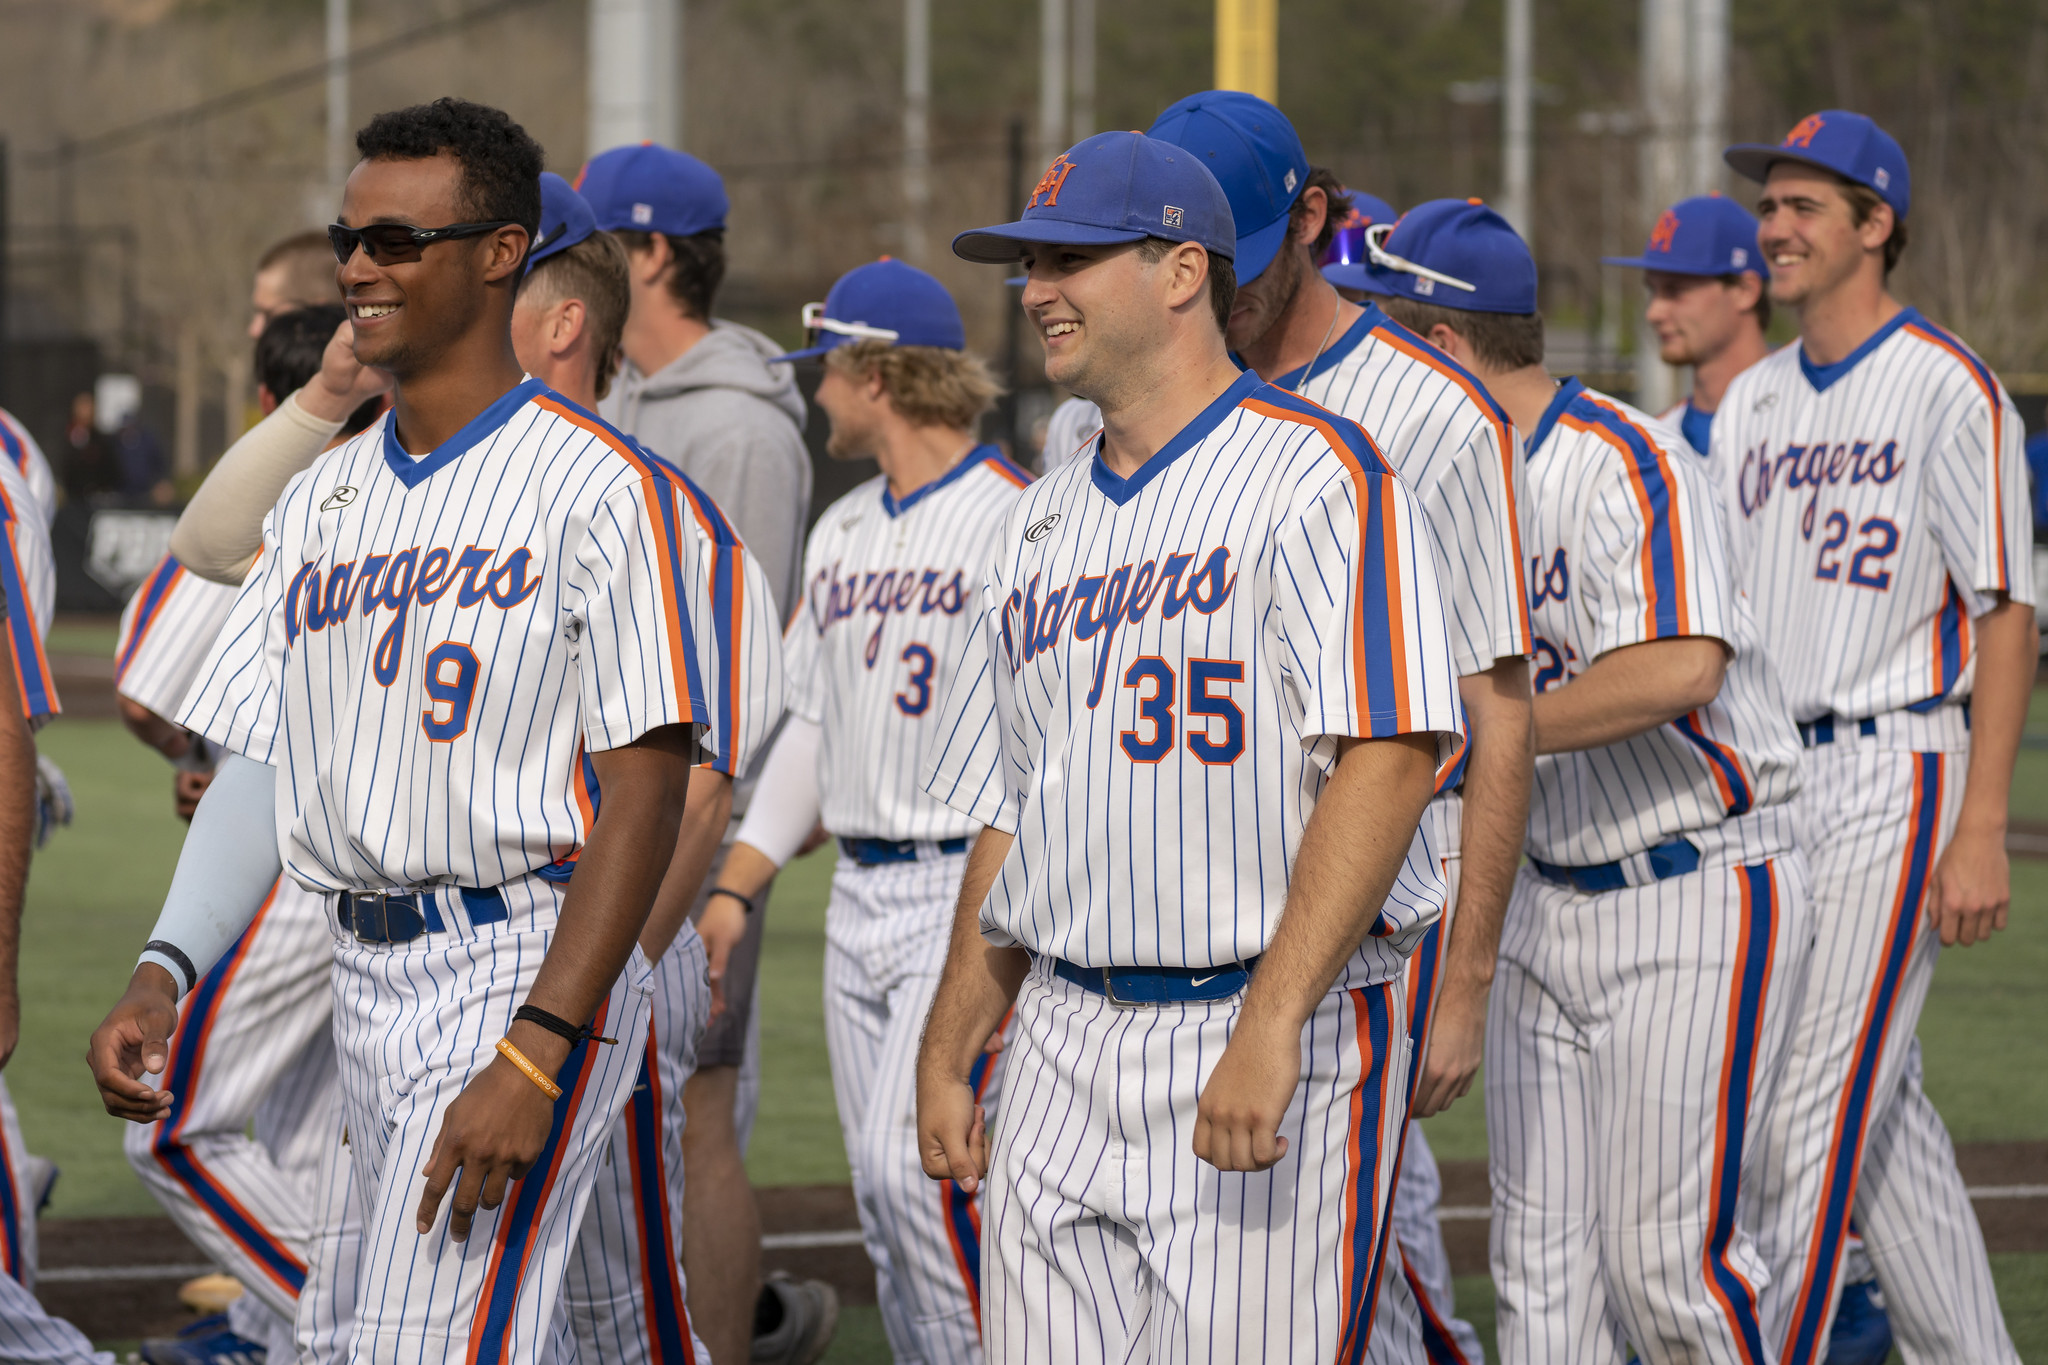 Several baseball players taking to the field to celebrate a win.